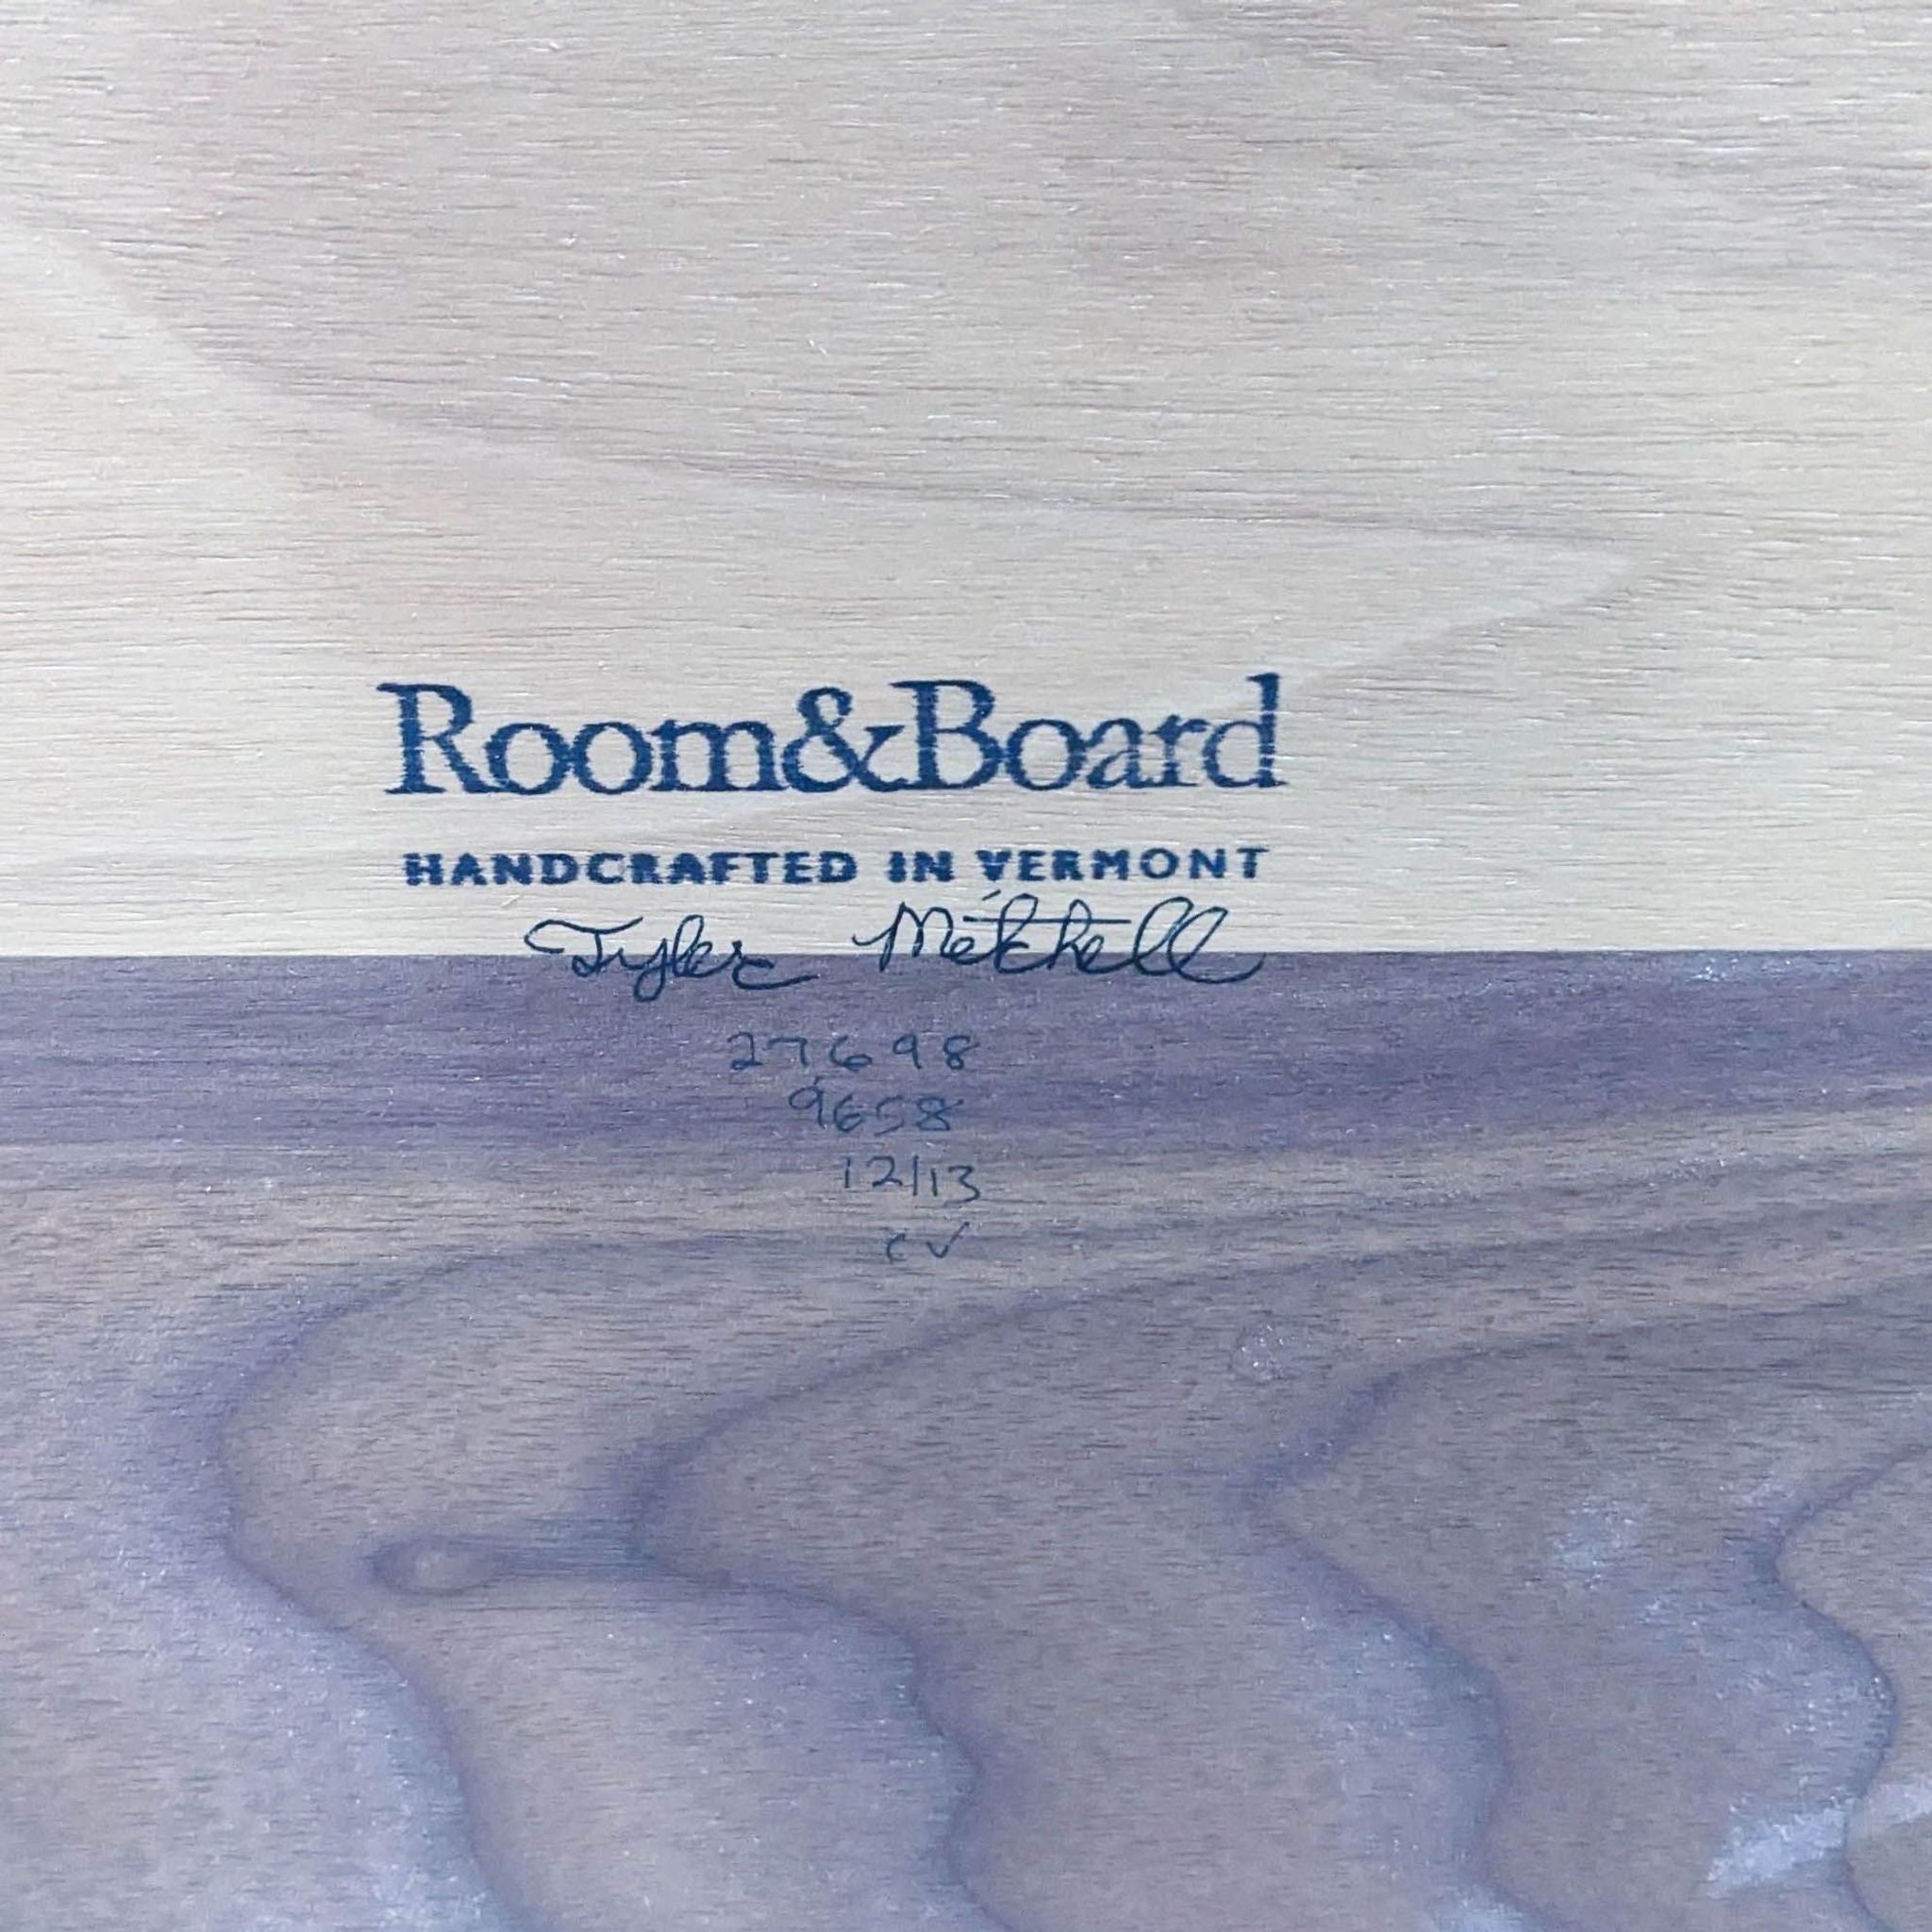 Close-up of Room & Board label on a solid walnut top of a Parsons dining table, with handcrafted in Vermont text and signature.